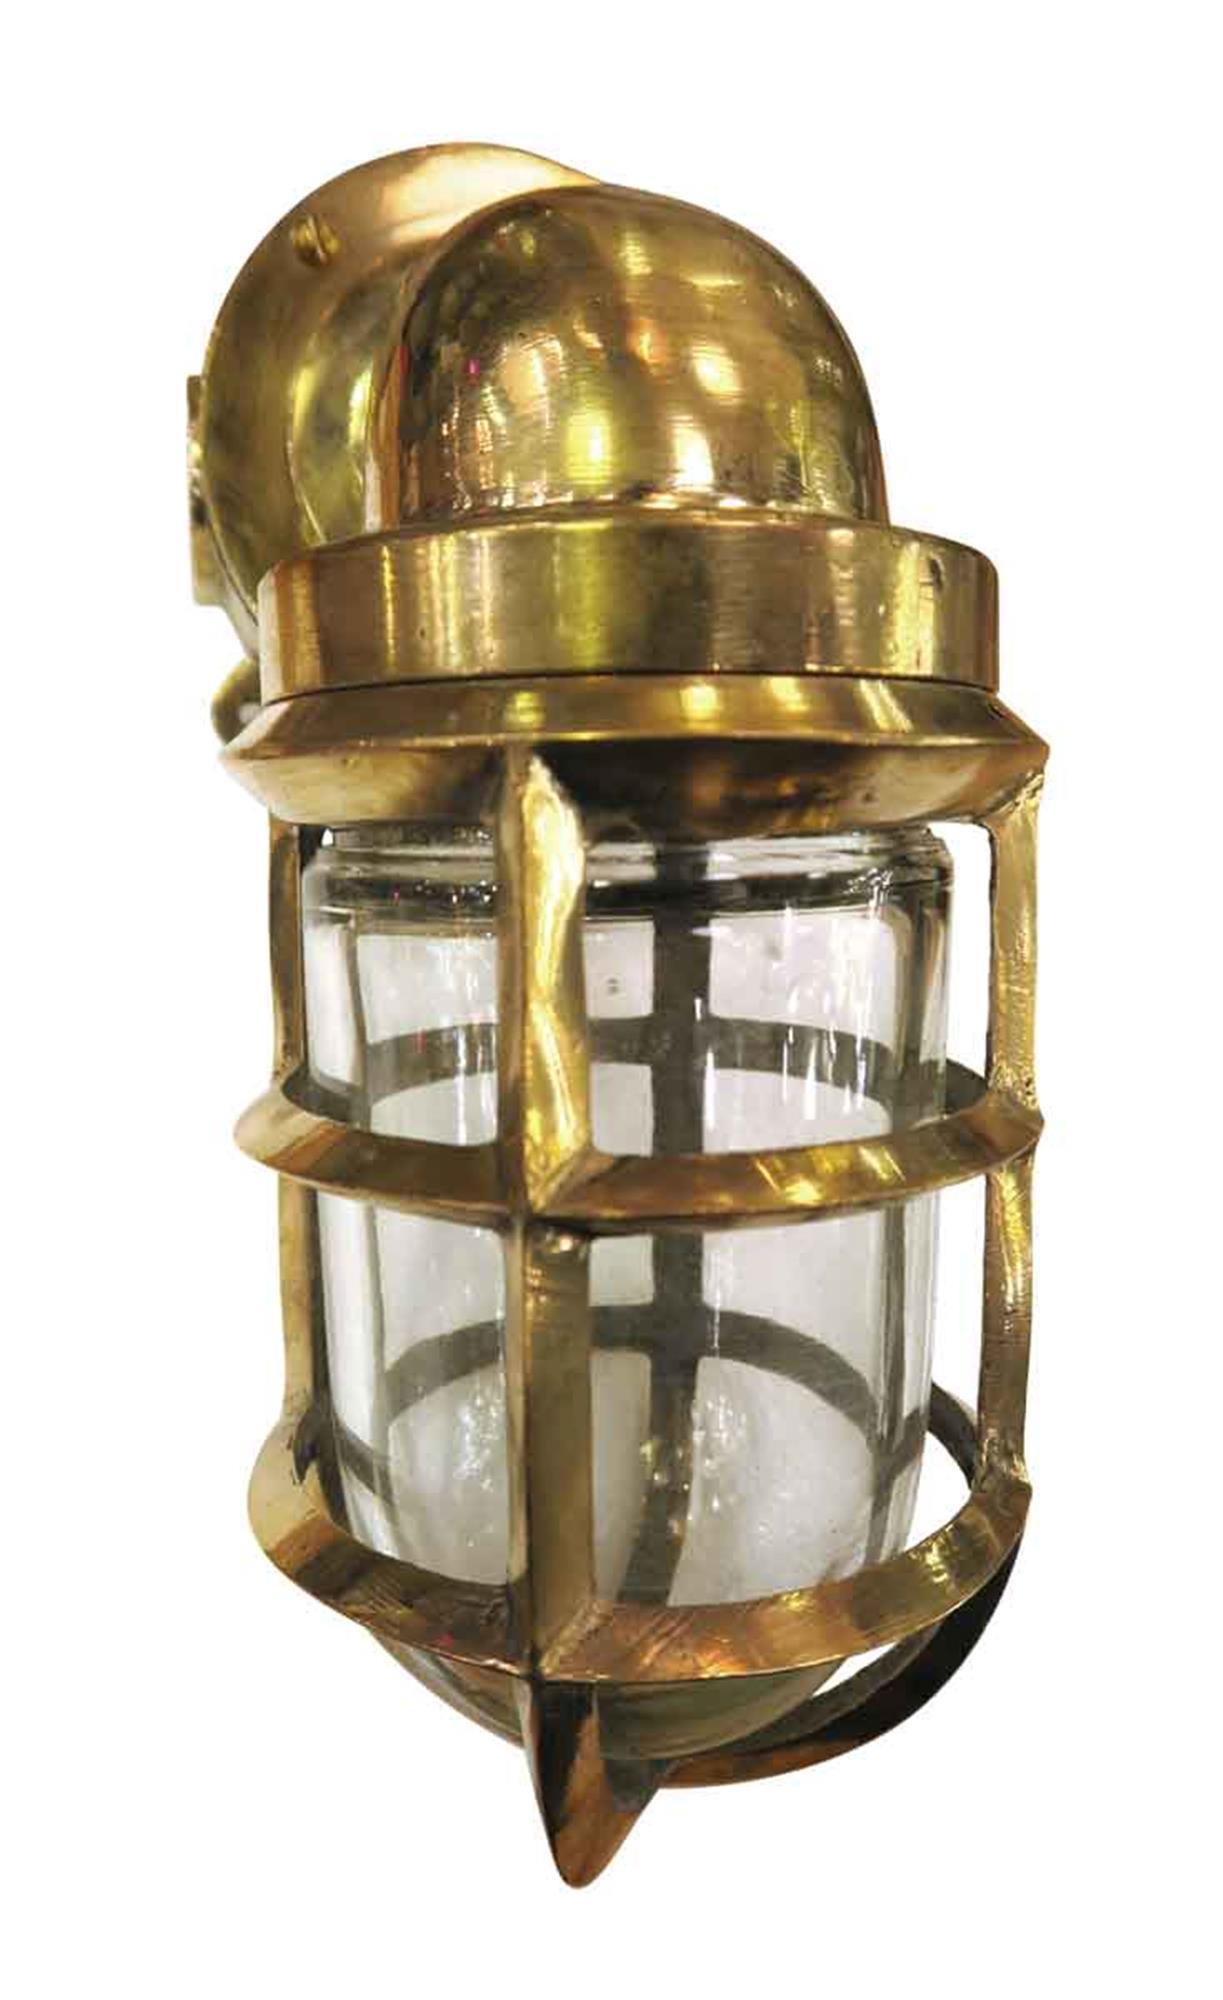 Contemporary Heavy Duty Polished Industrial Brass Nautical Ship Light Sconce